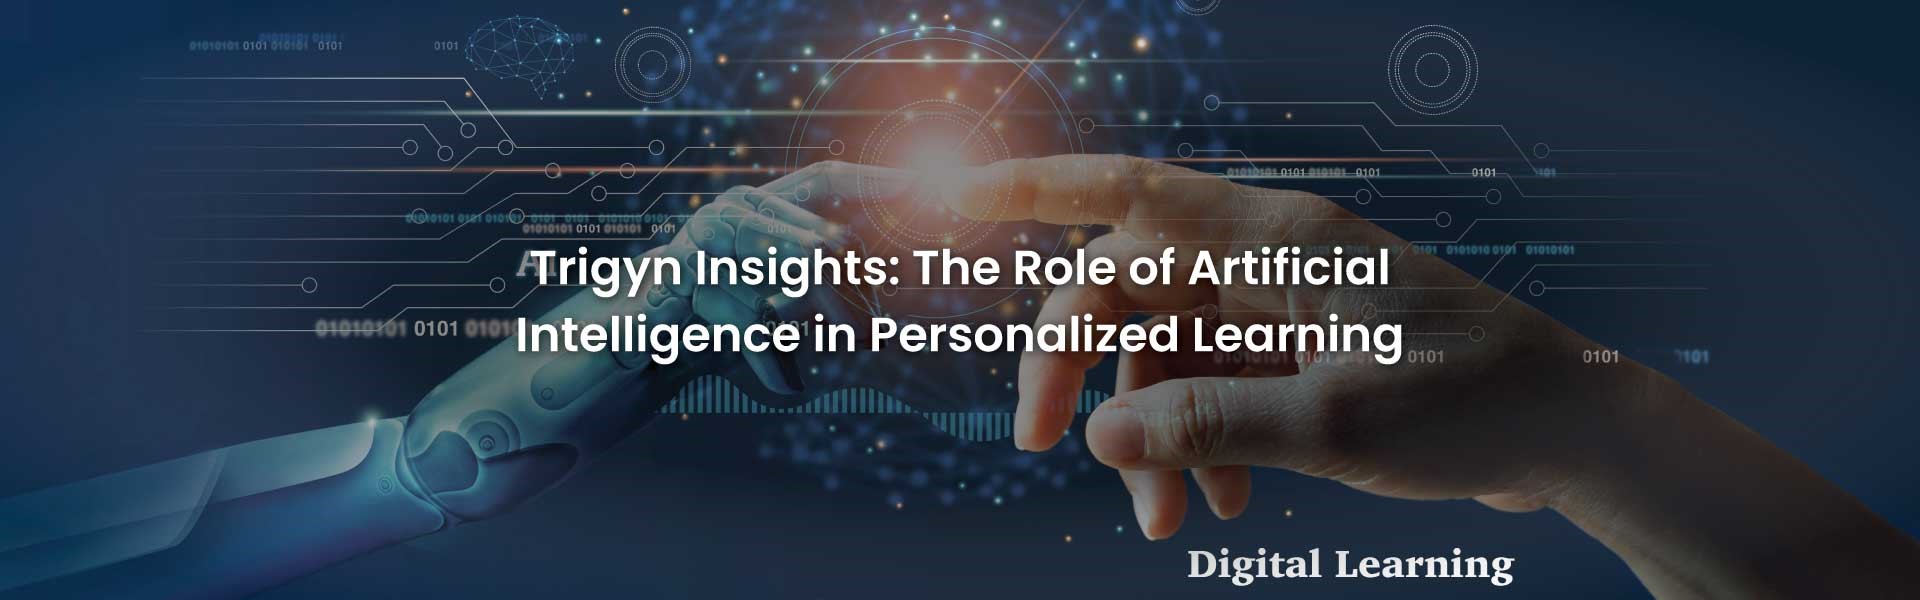 Artificial Intelligence in Personalized Learning